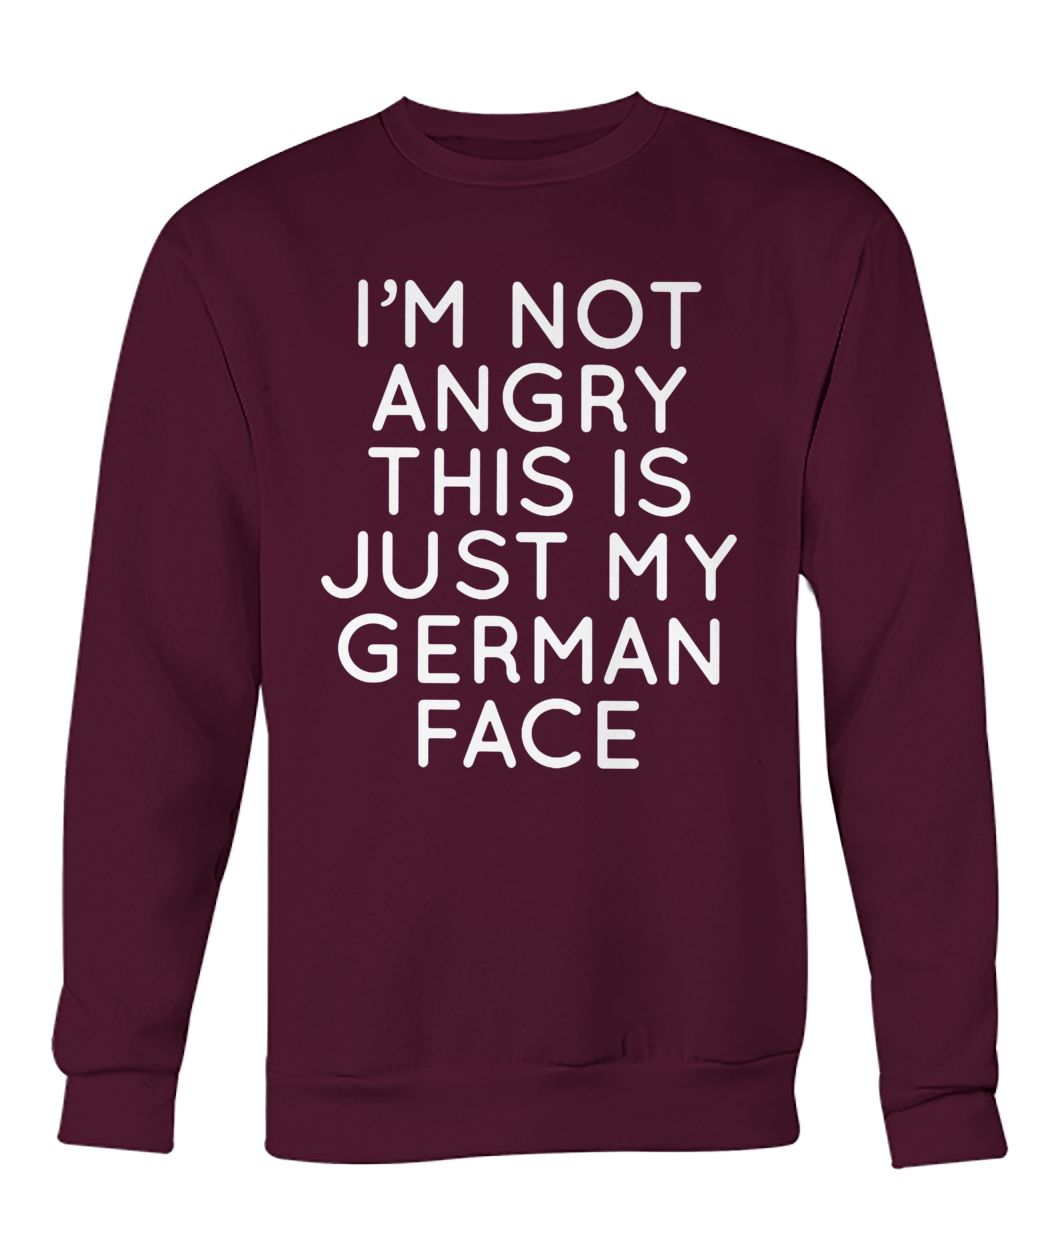 I'm not angry this is just my german face crew neck sweatshirt